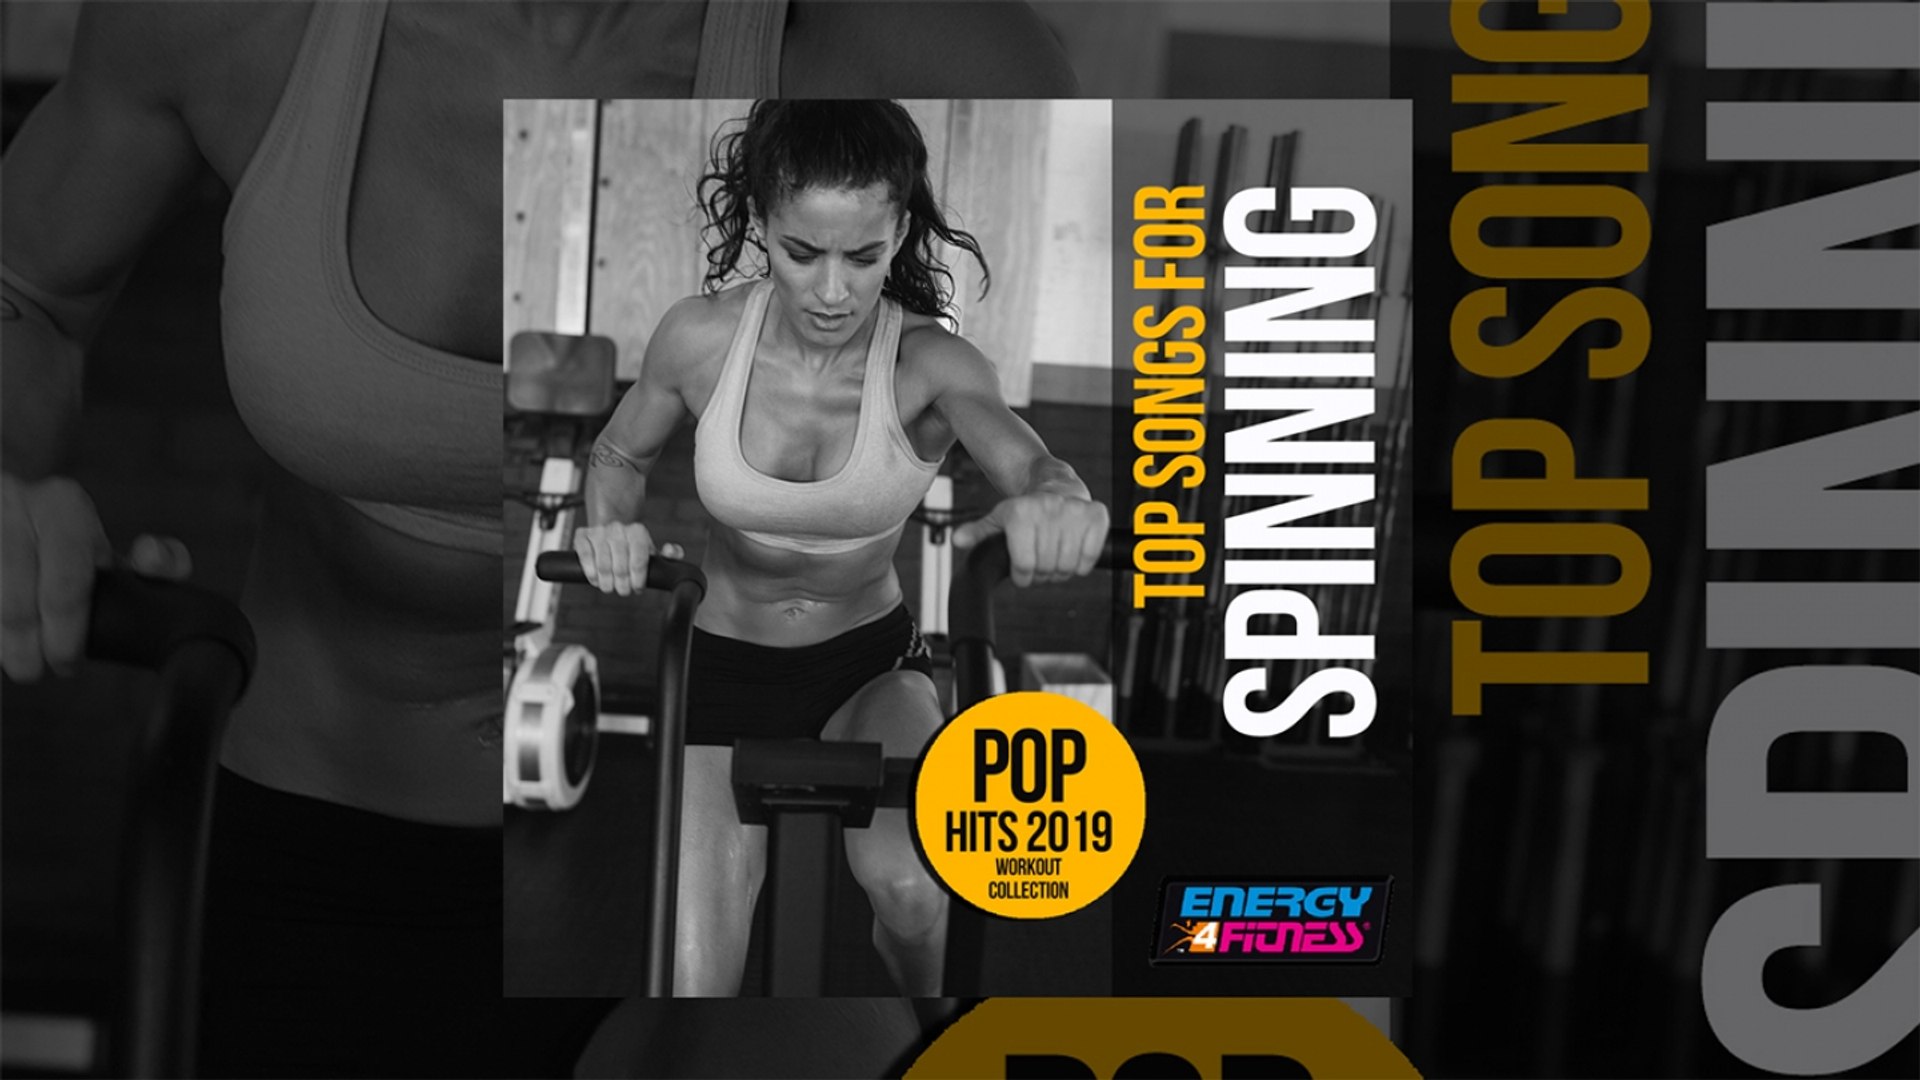 E4F - Top Songs For Spinning Pop Hits 2019 Workout Collection - Fitness & Music 2019